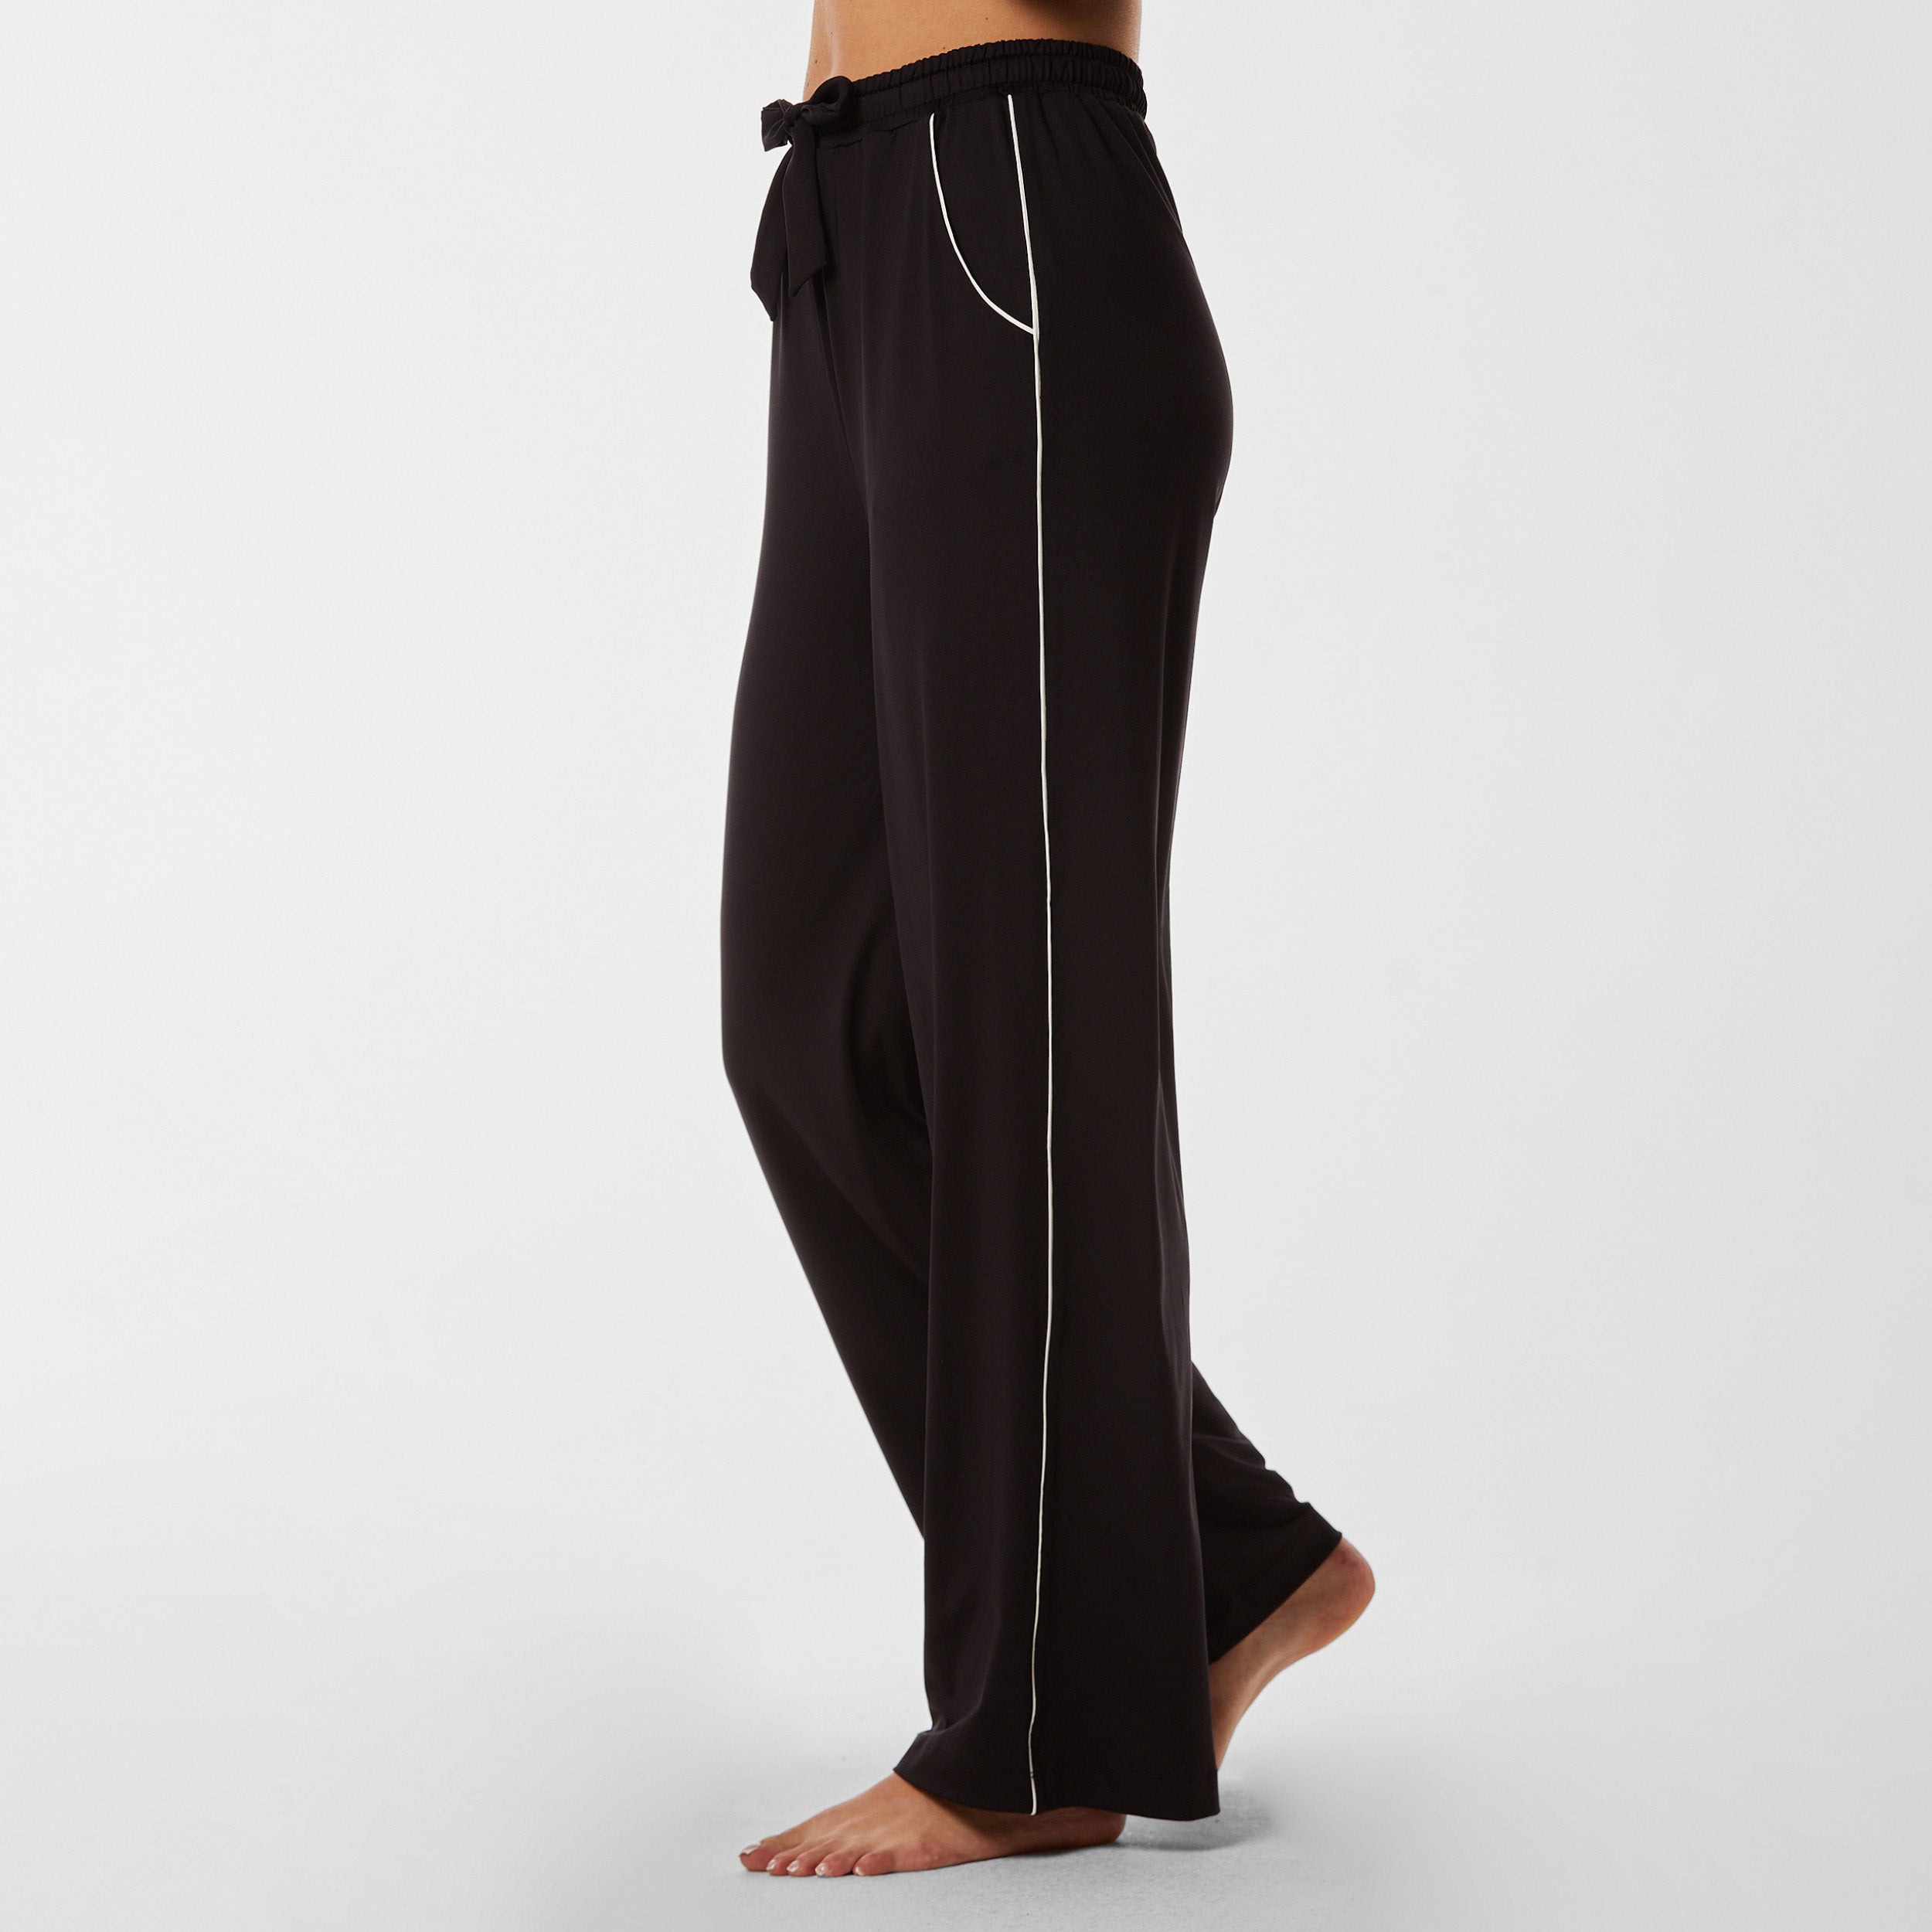 Side view of soft black pajama pants with white piping detail.